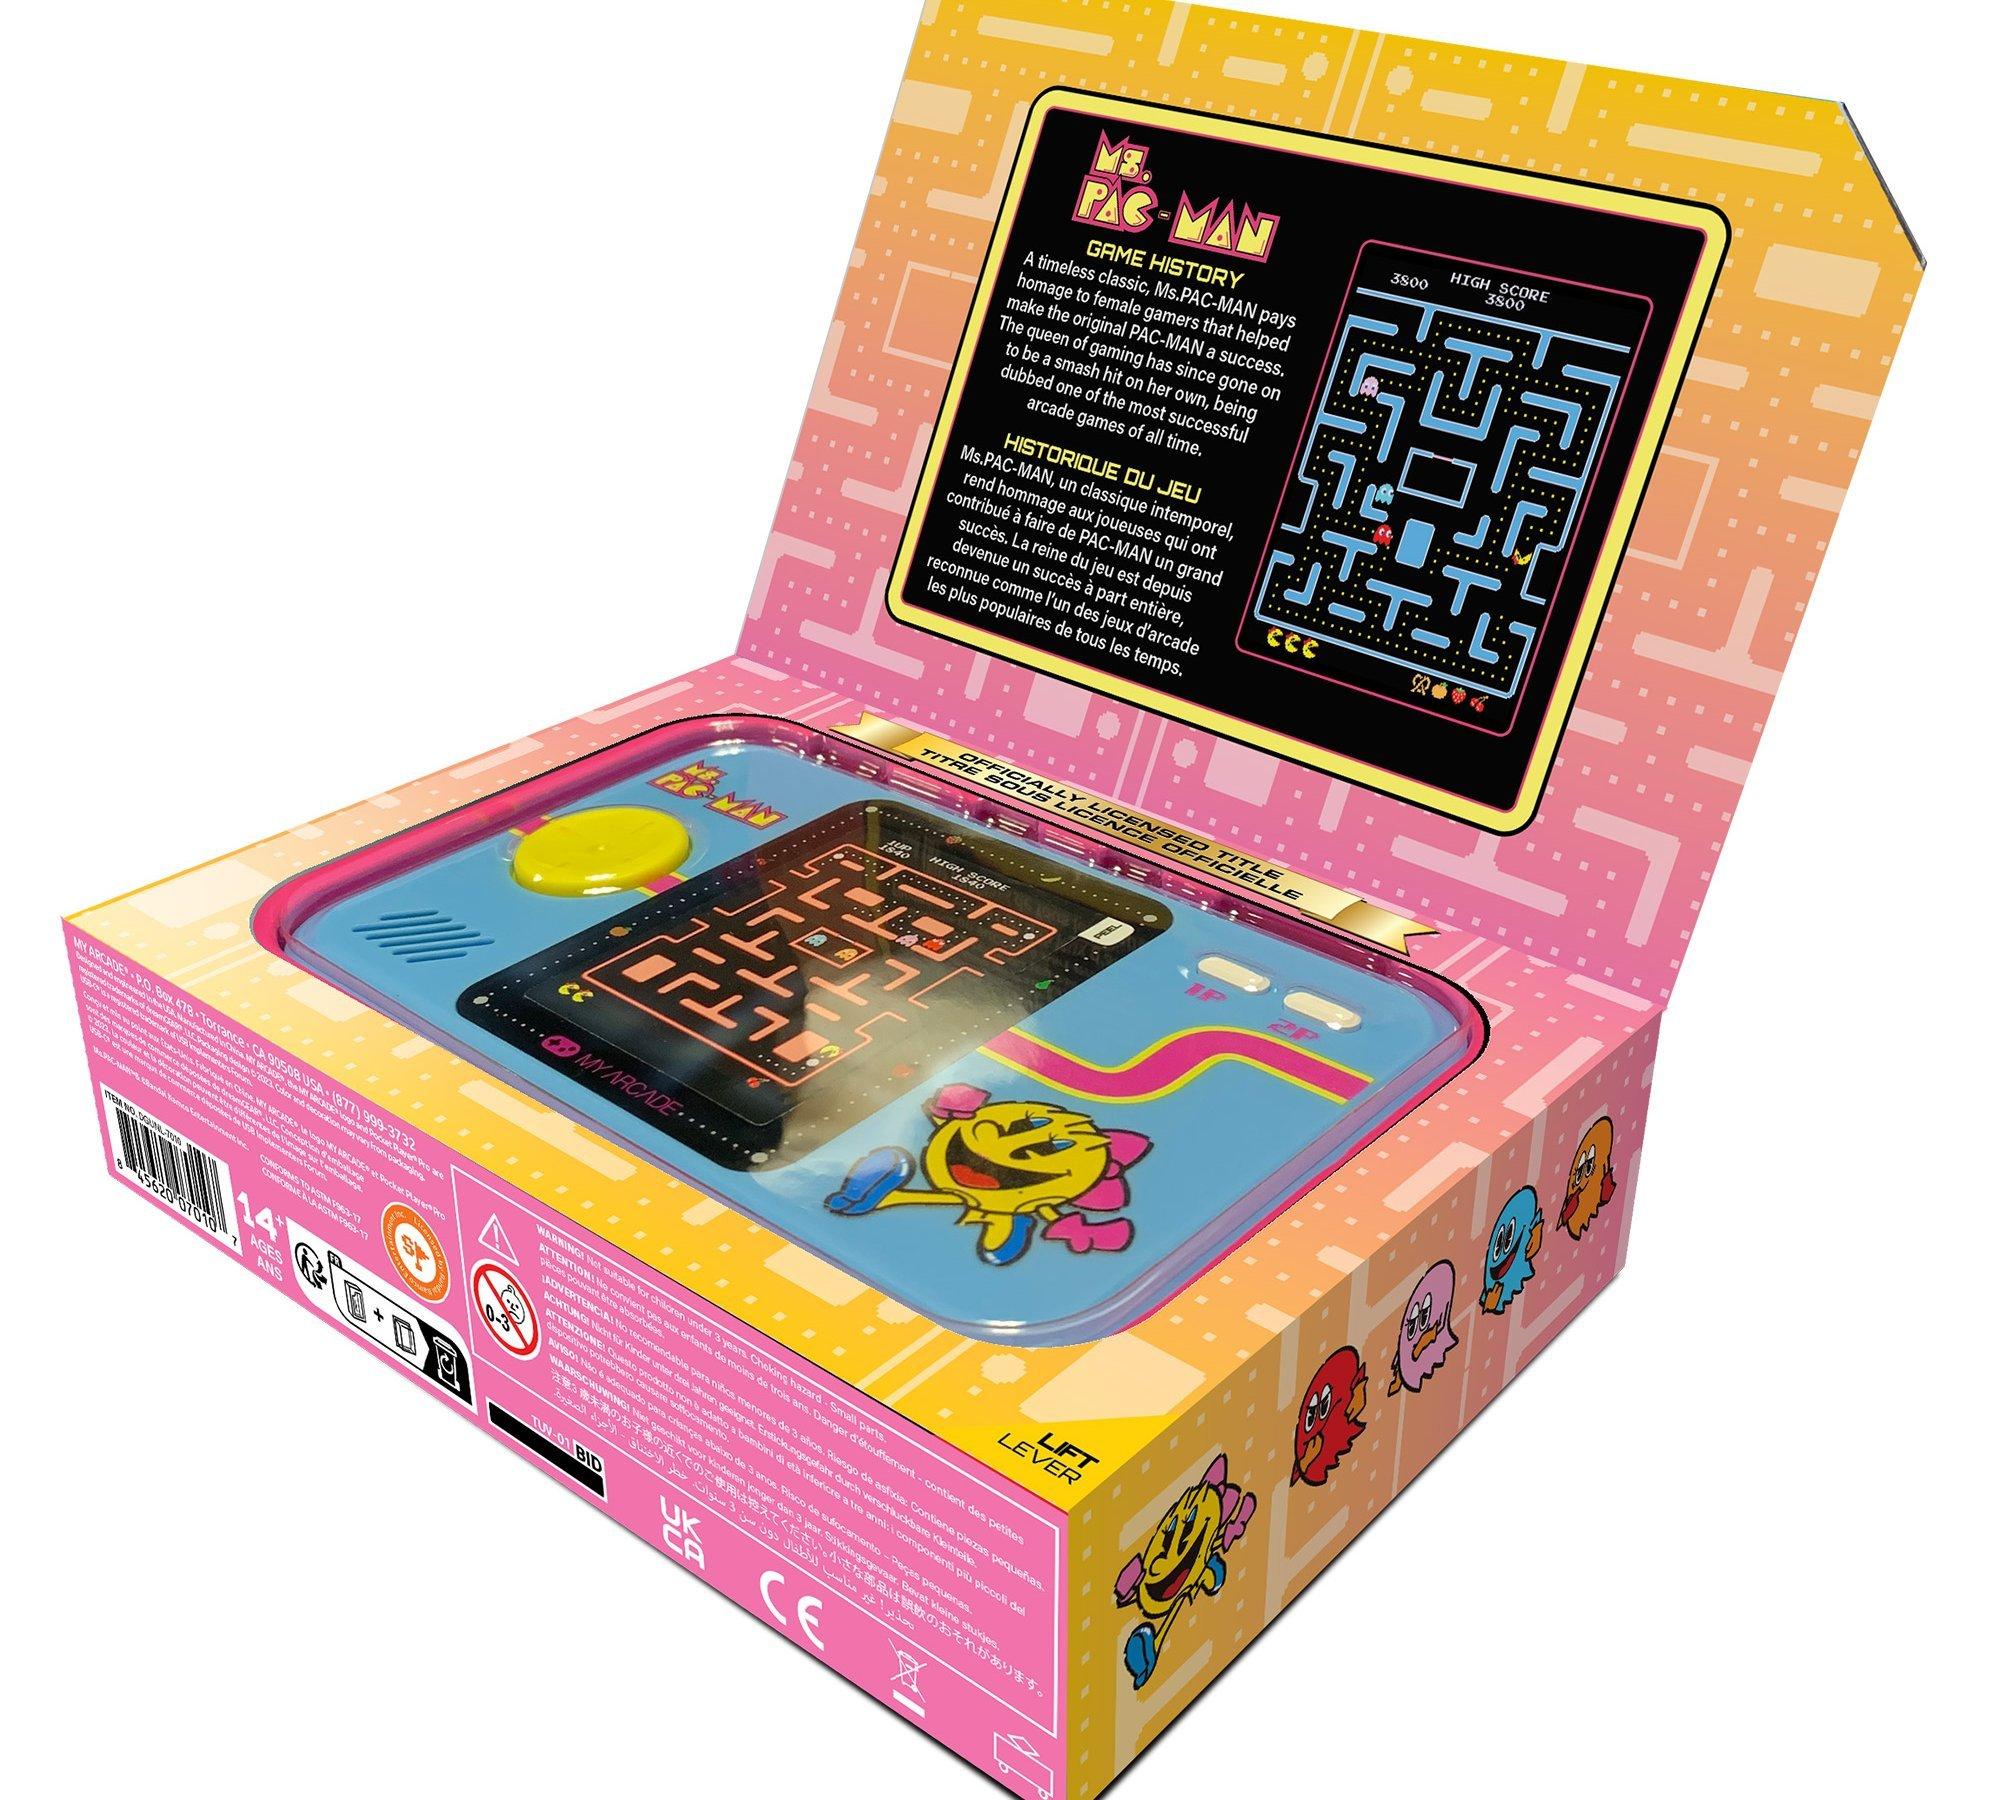 My Arcade MS. PAC-MAN Pocket Player PRO Handheld Portable Video Game System